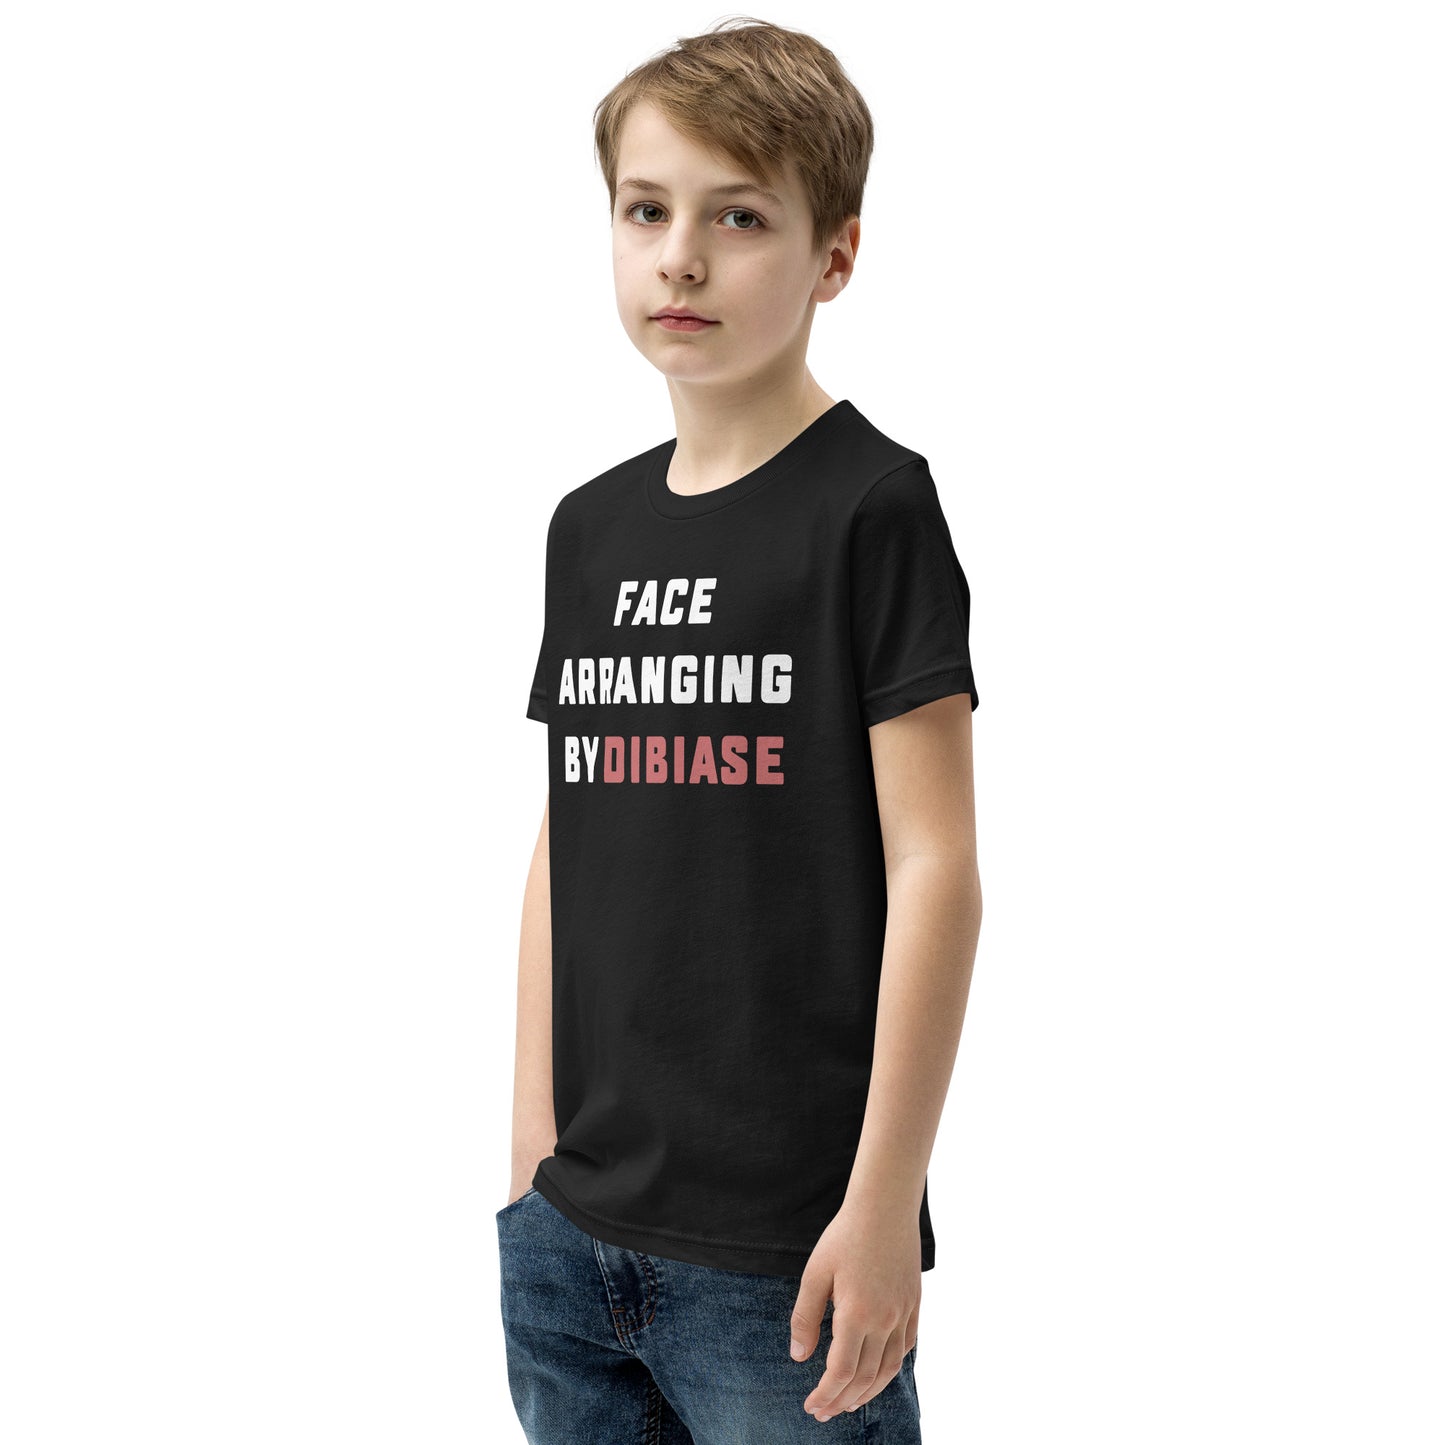 Ted DiBiase - Face Arranging Youth Tee